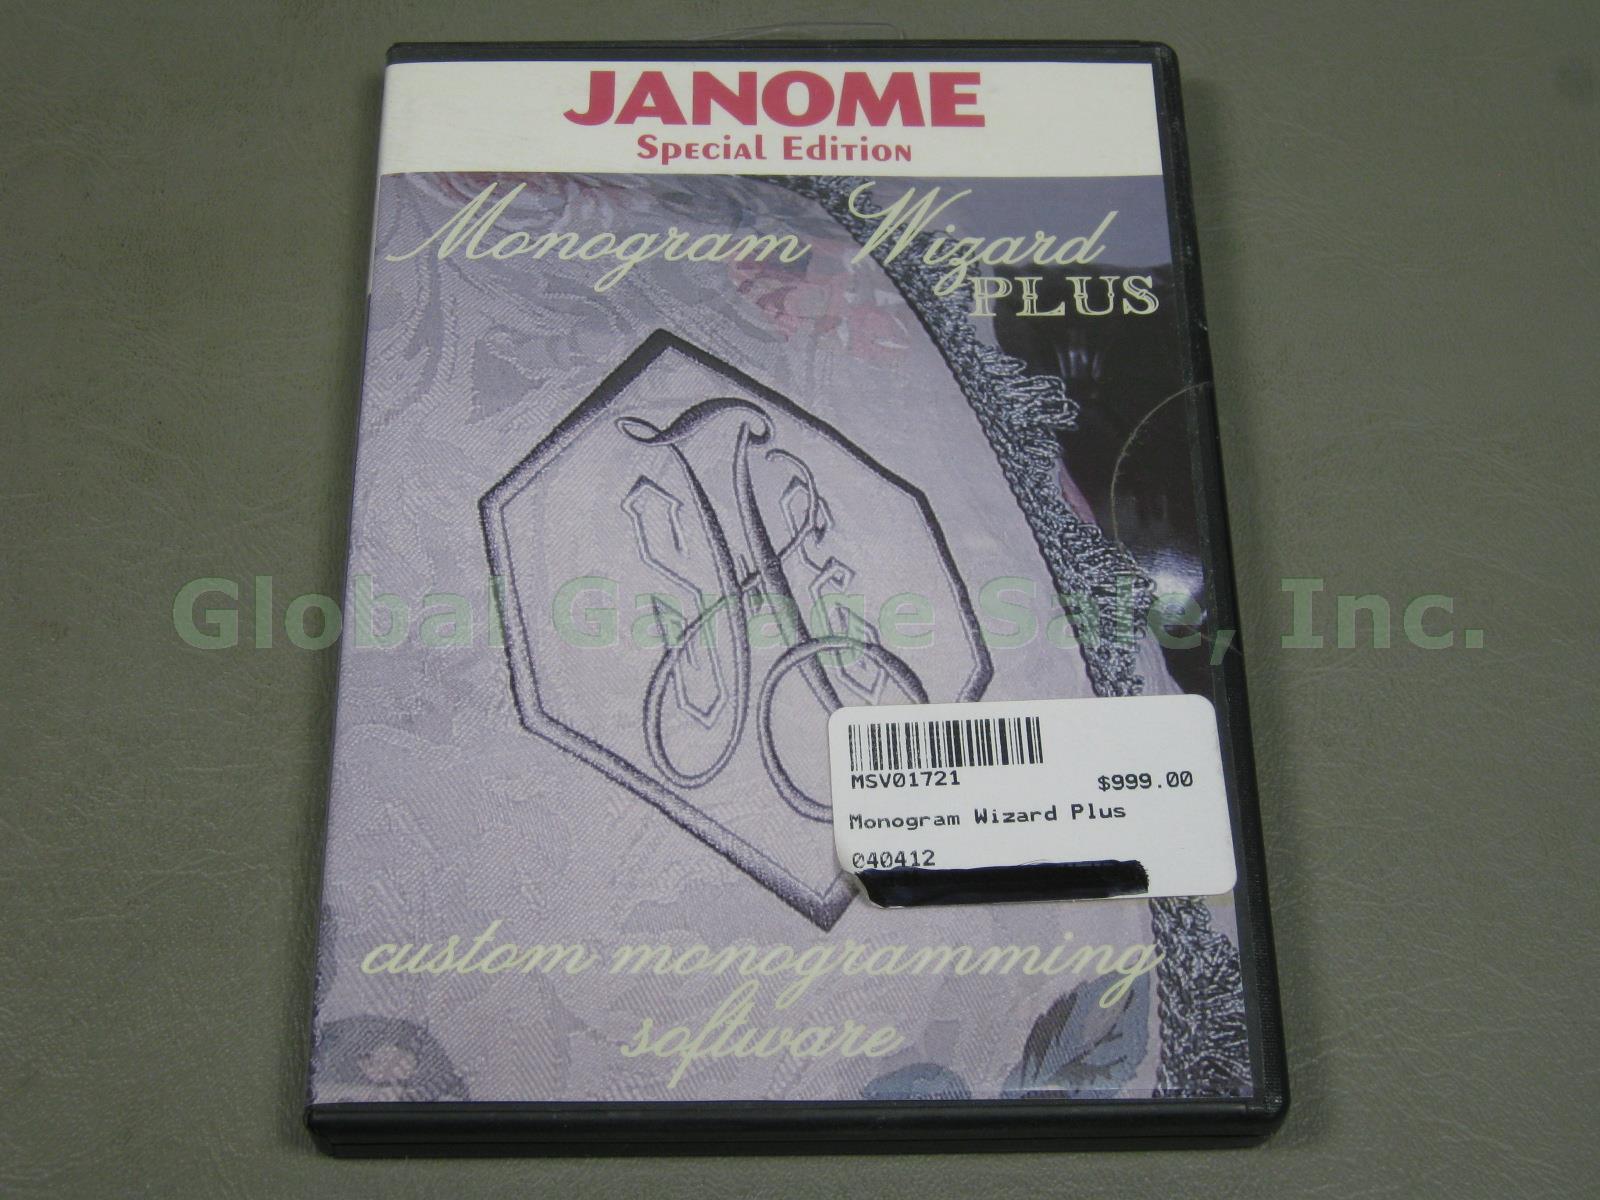 NEW Janome Special Edition Monogram Wizard Plus Embroidery Machine Software CD